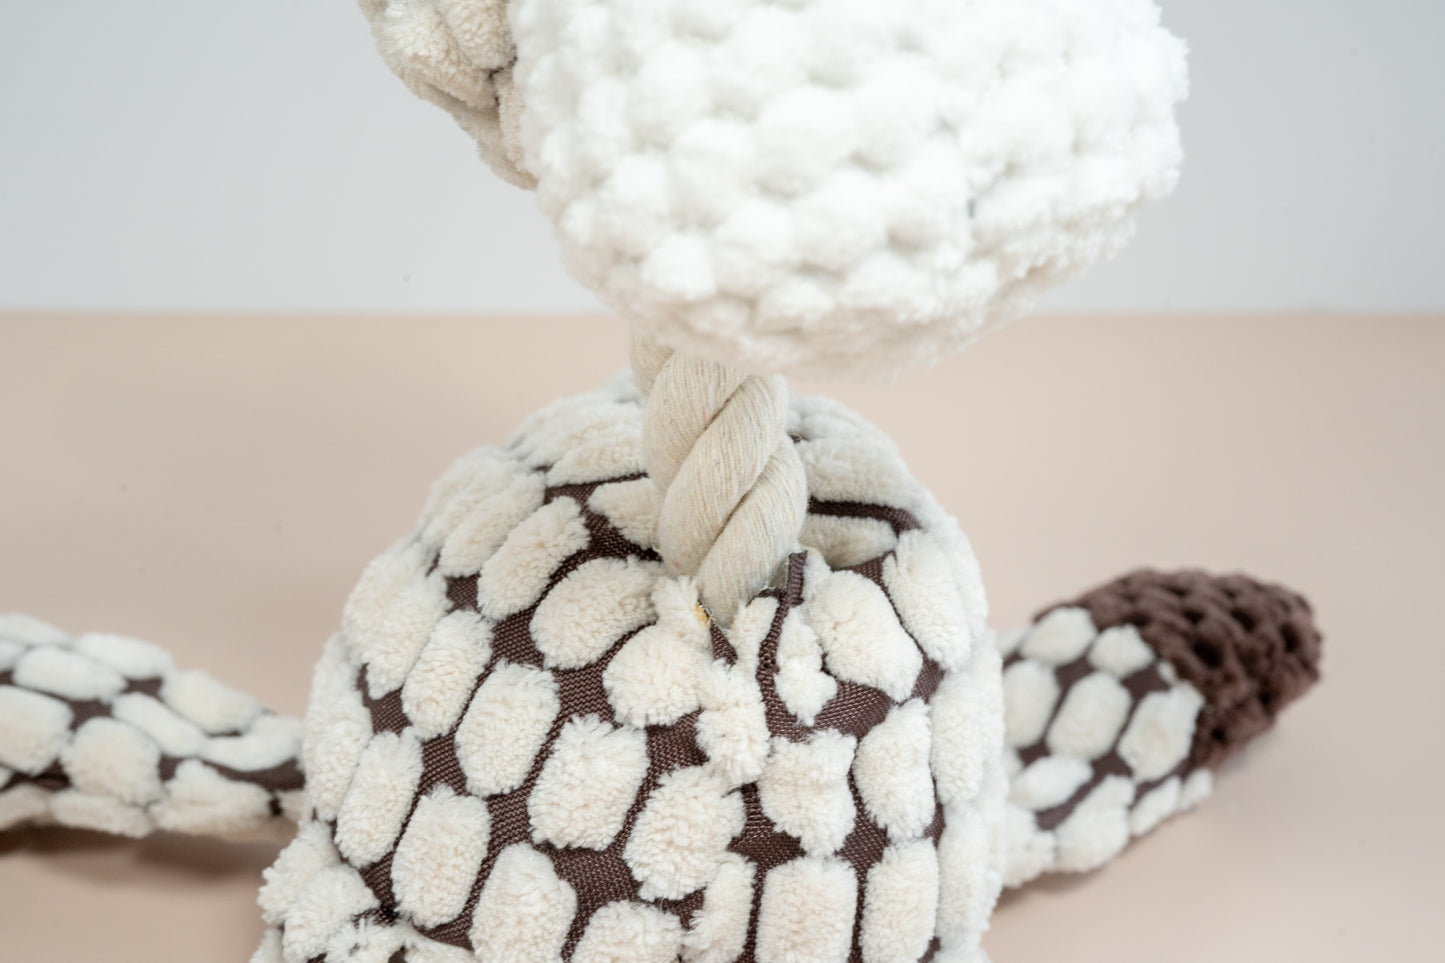 Close-up view of the rope neck of the giraffe dog plush.